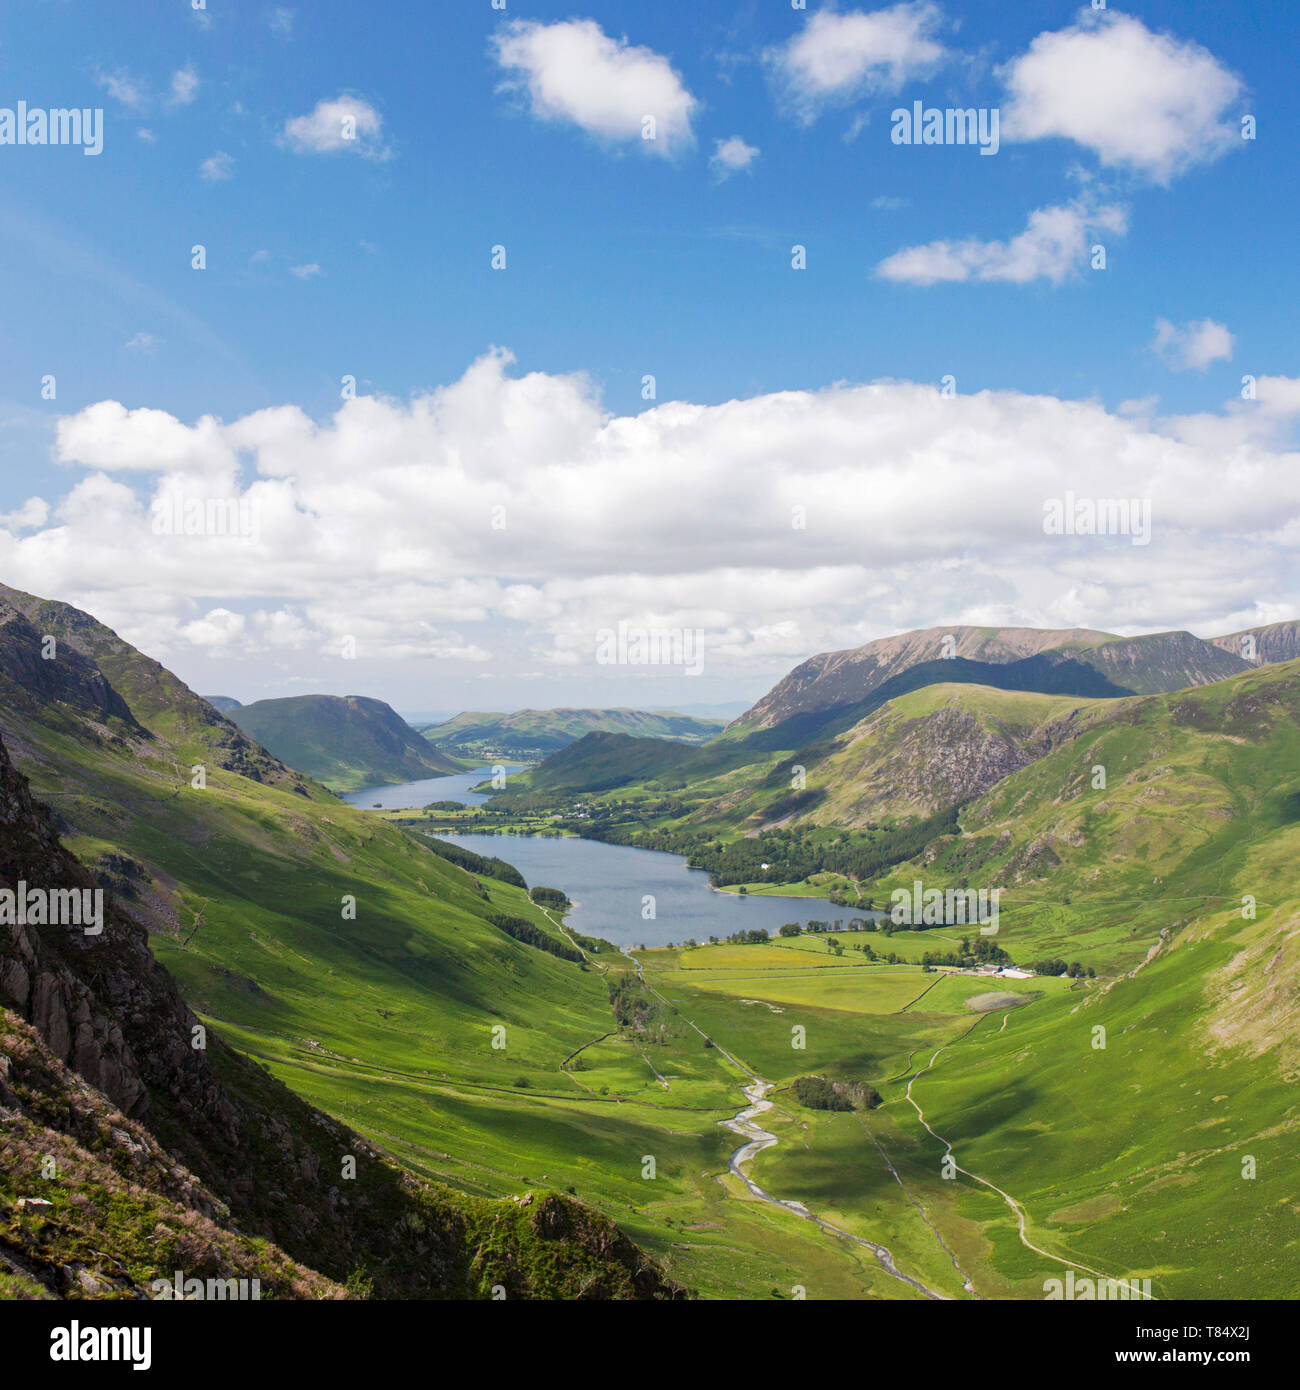 Lake District National Park, Cumbria, England. View over Warnscale Bottom, Buttermere and distant Crummock Water from the eastern slopes of Haystacks. Stock Photo